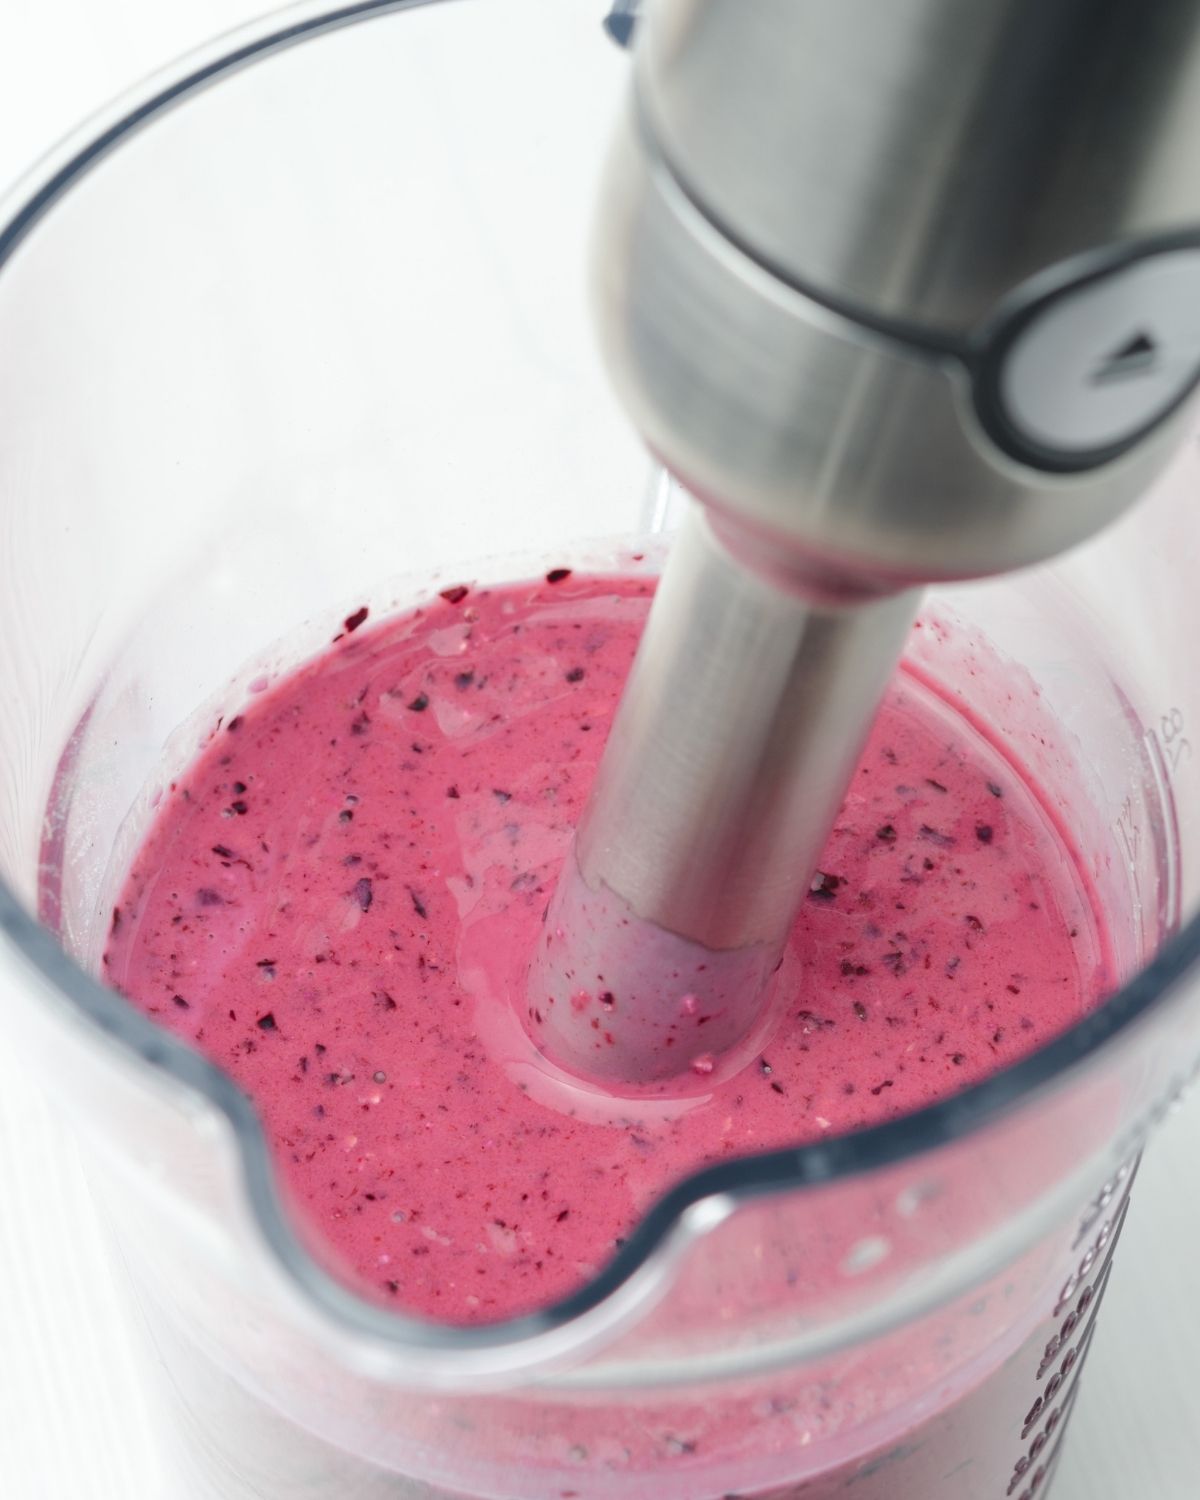 Blending the smoothie.